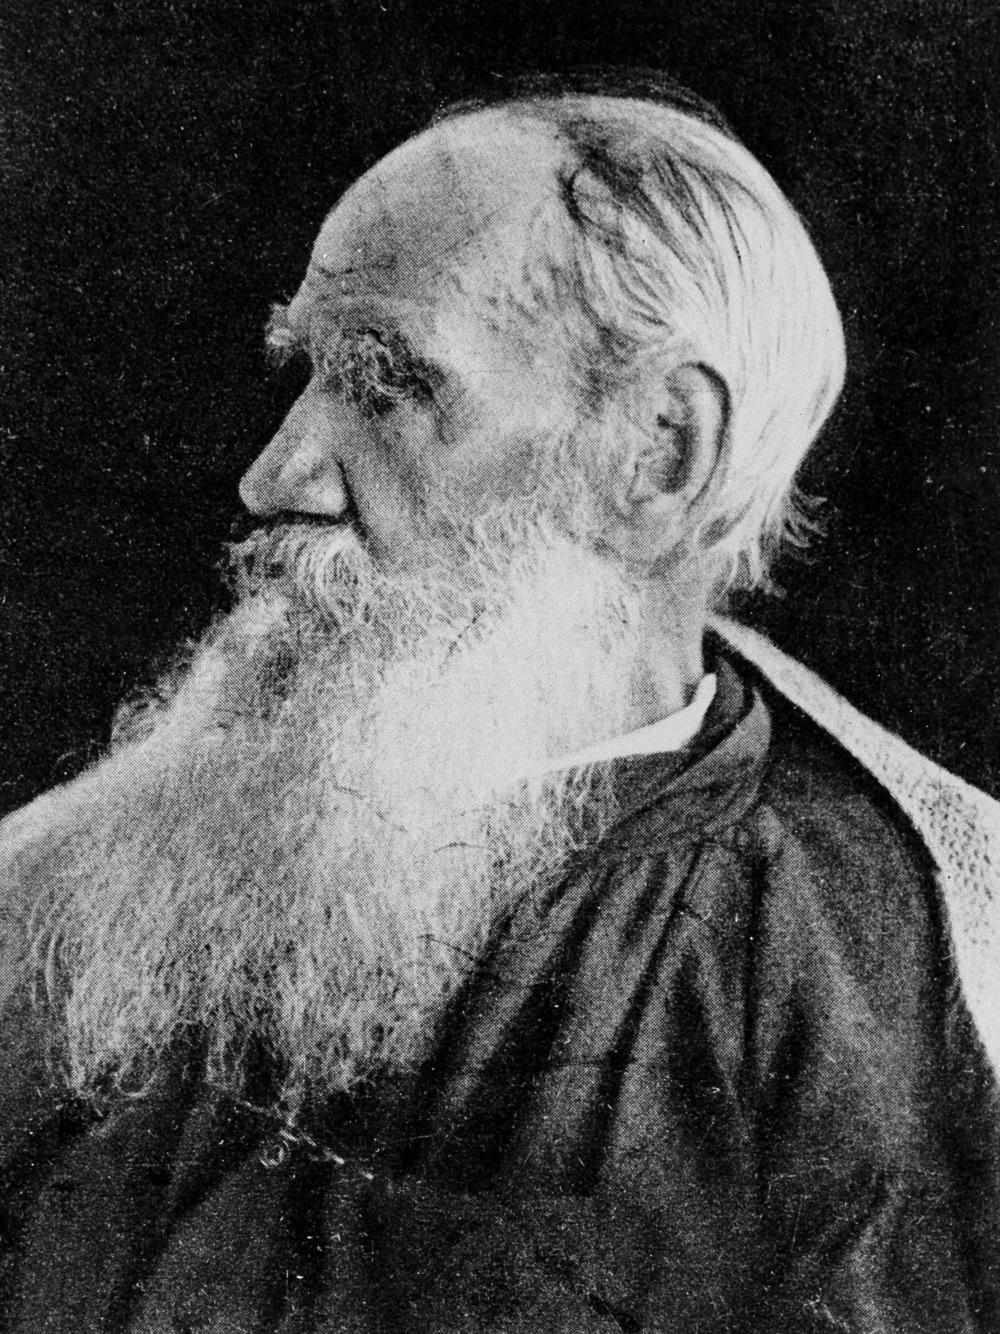 Leo Tolstoy, shown in this undated photo, was a young Russian artillery officer in the Crimean War. He drew on those experiences in his writing, including <em>War and Peace</em>.